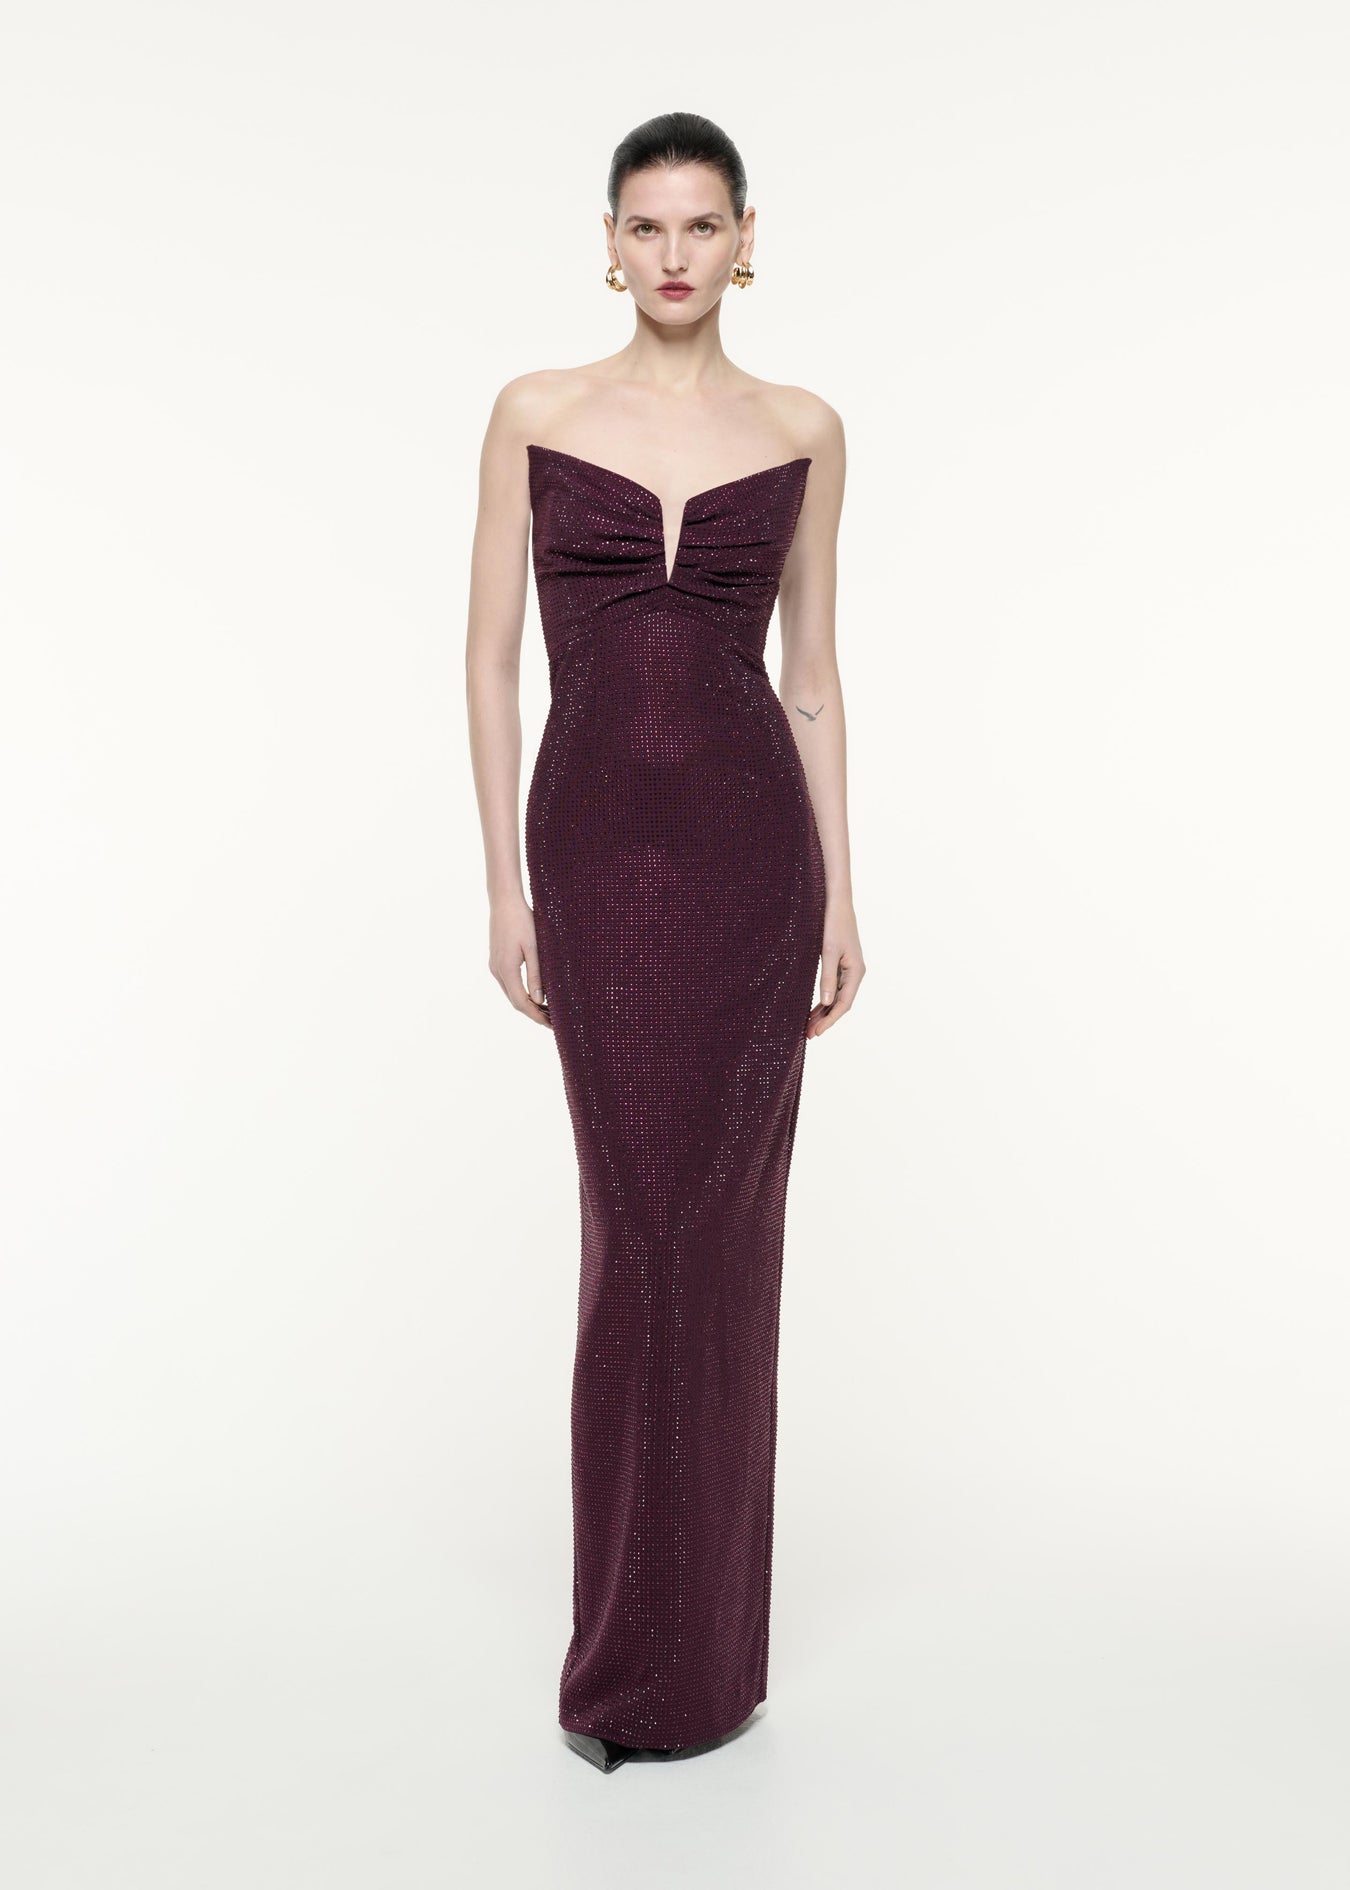 A front view image of a model wearing the Strapless Diamante Gown in Aubergine